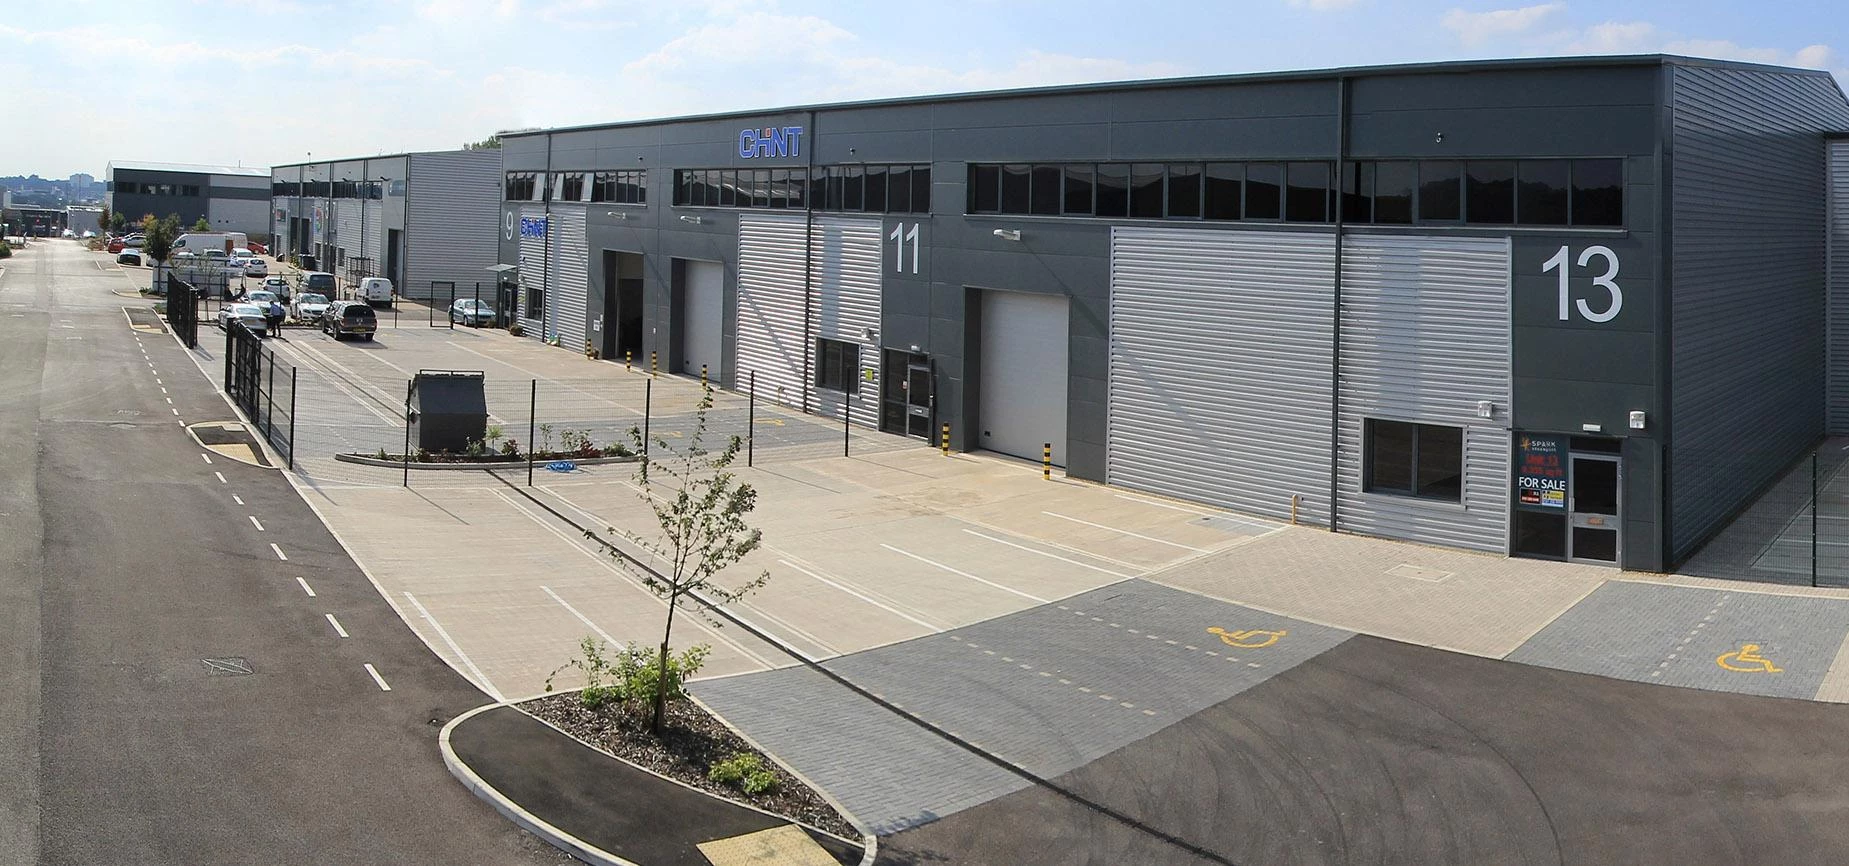 Industrial units at S:Park in Stockport